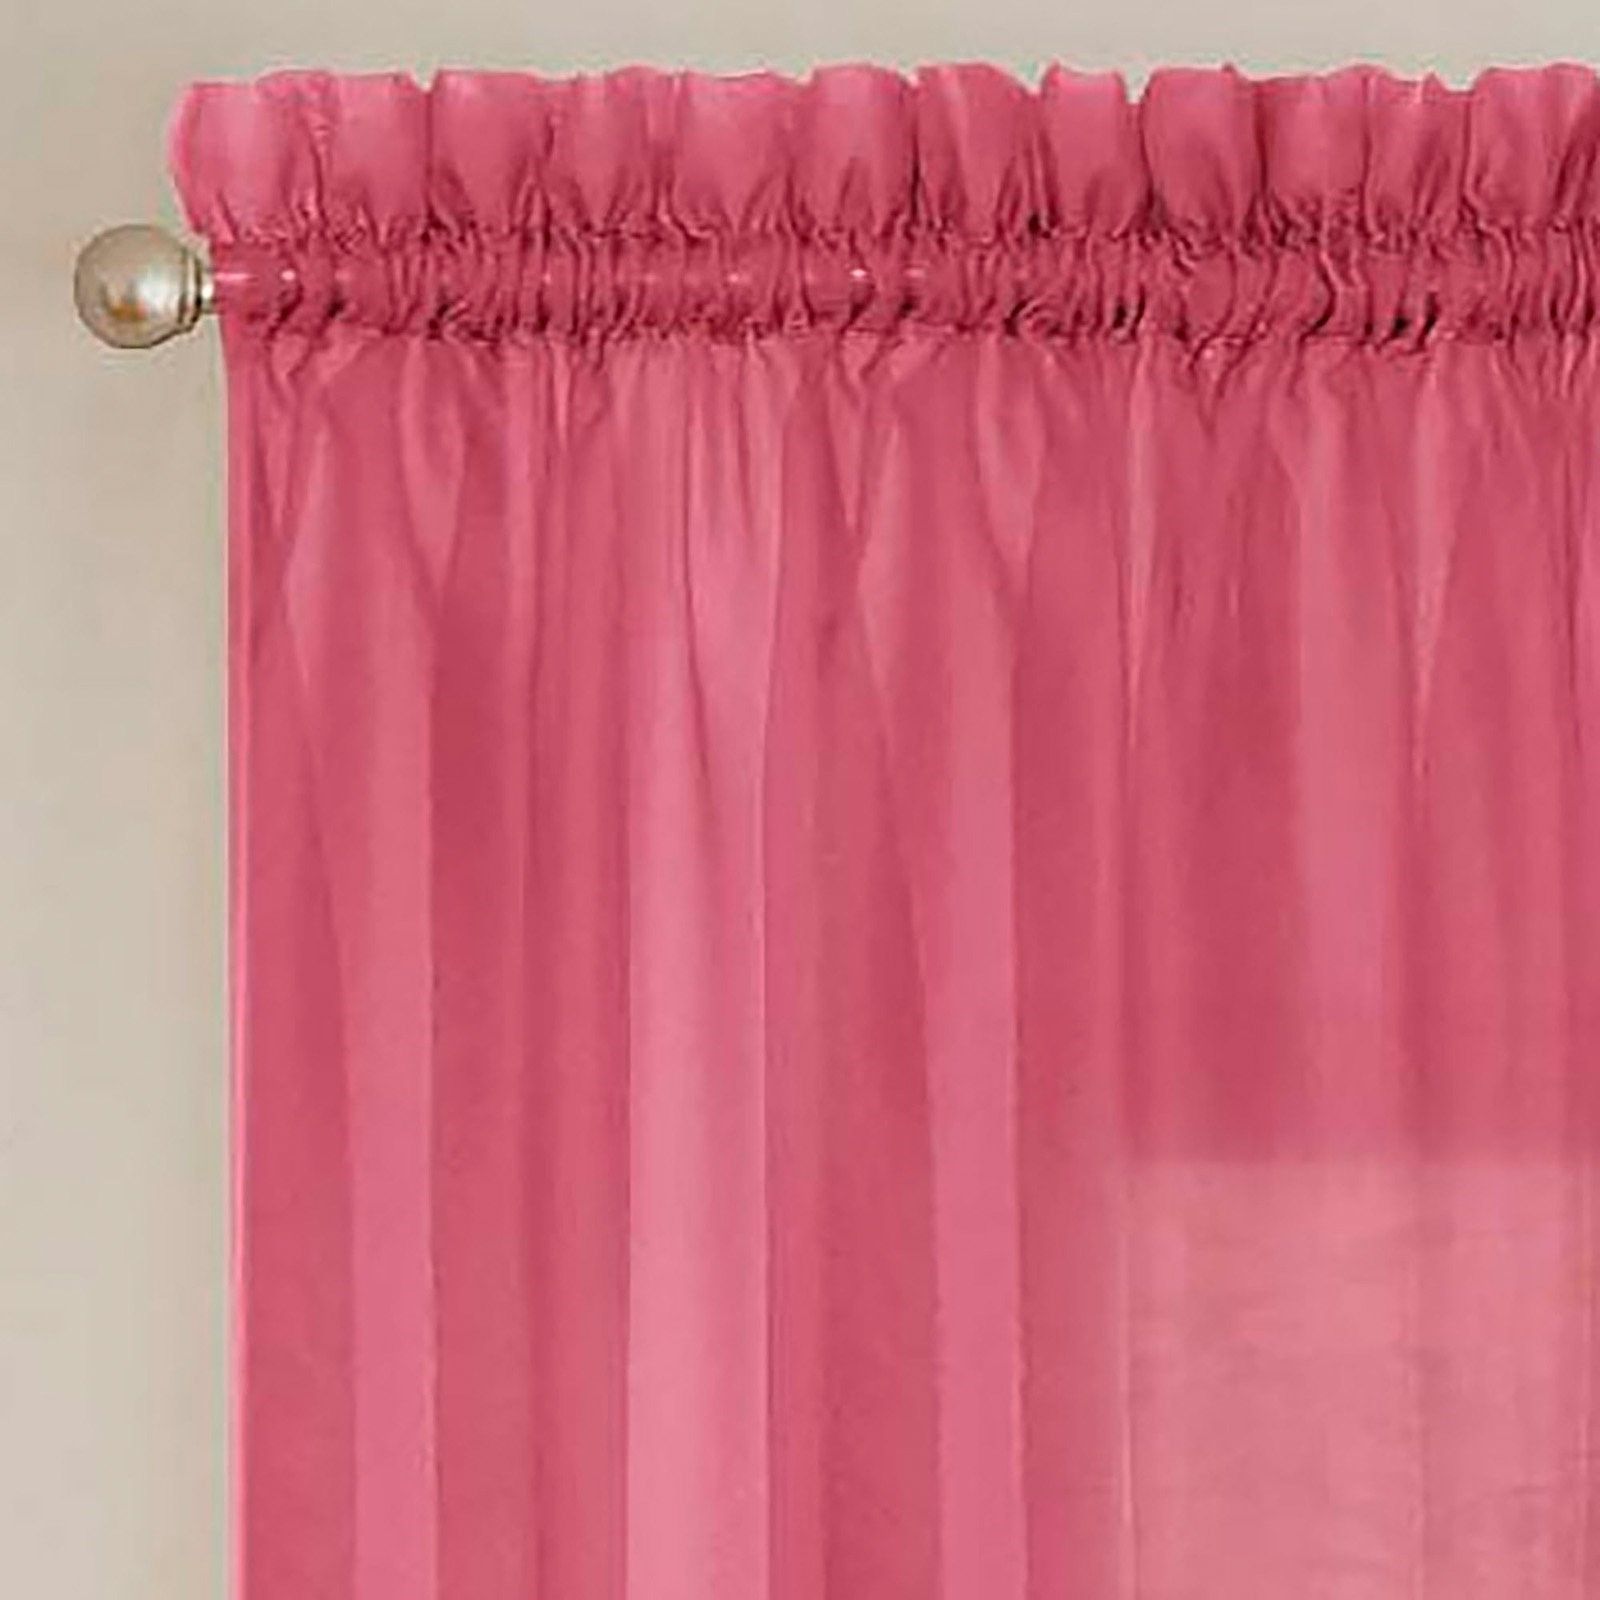 Pairs To Go Victoria Voile Curtain Panel Pairs Throughout Widely Used Pairs To Go Victoria Voile Pair (View 14 of 20)